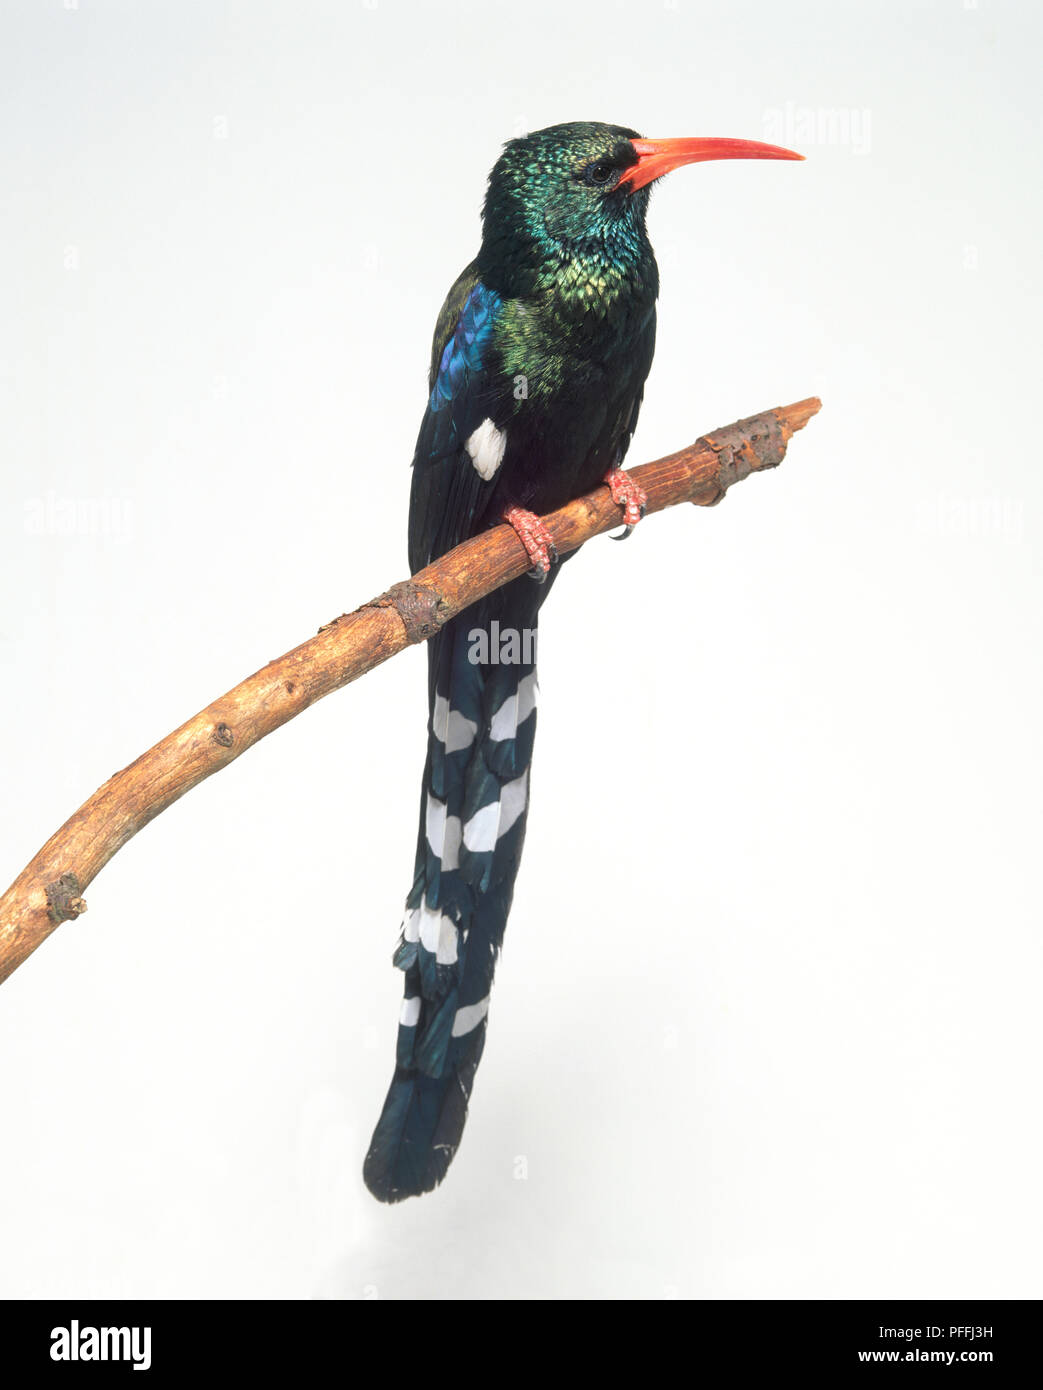 Green wood hoopoe (Phoeniculus purpureus), perched on a branch, displaying its long red bill and long tail feathers Stock Photo